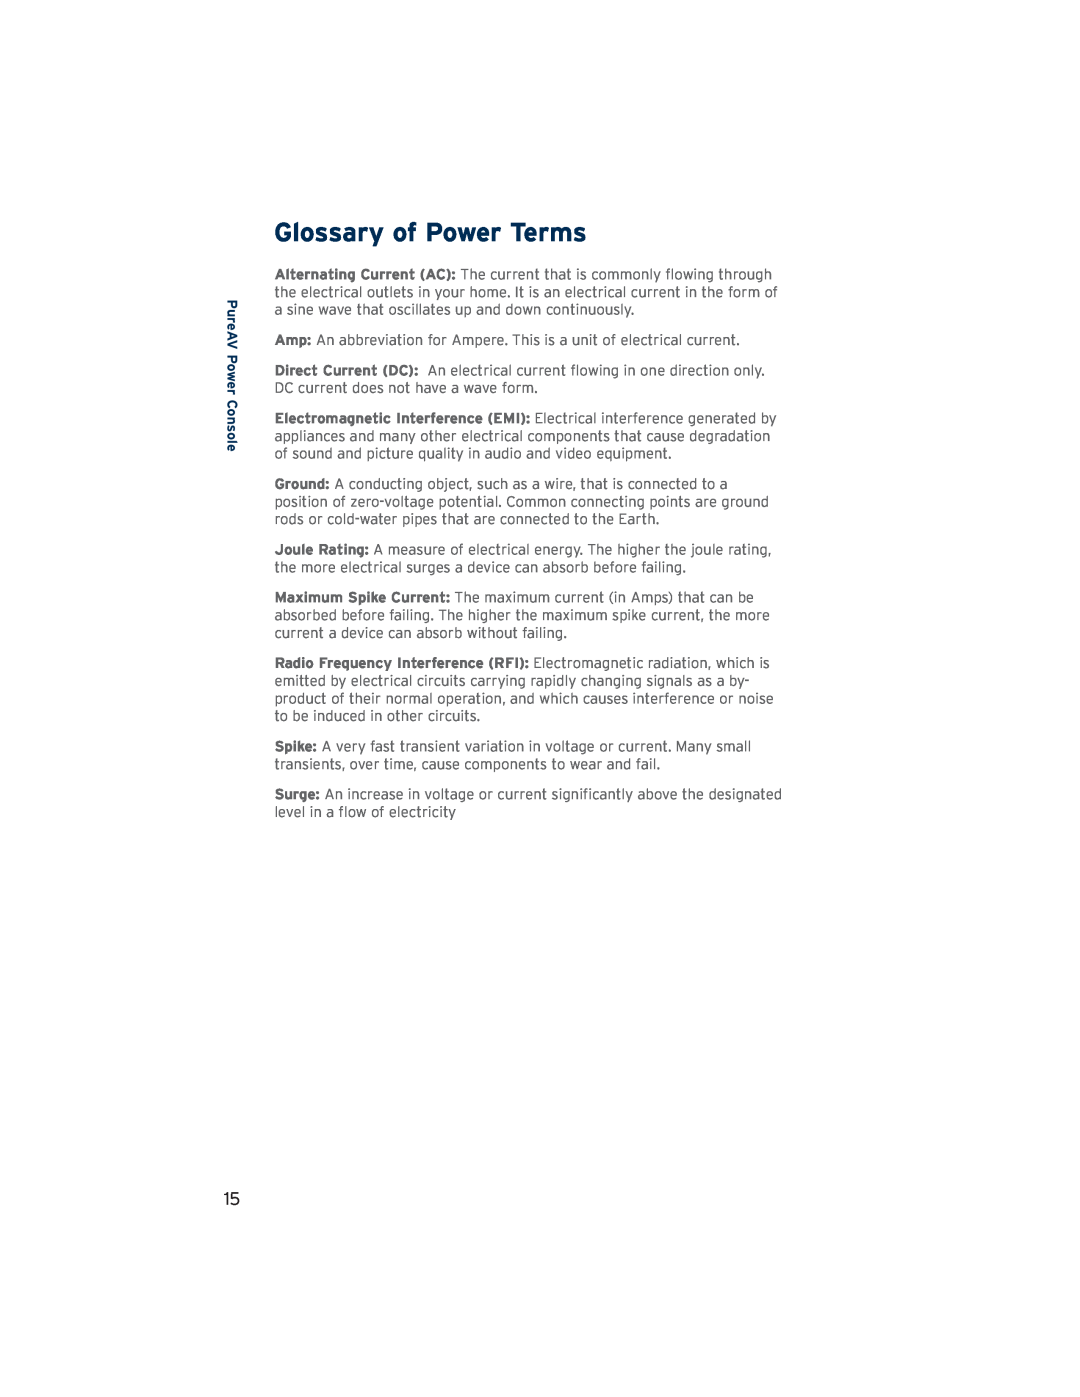 Belkin PF30 user manual Glossary of Power Terms, PureAV Power Console 